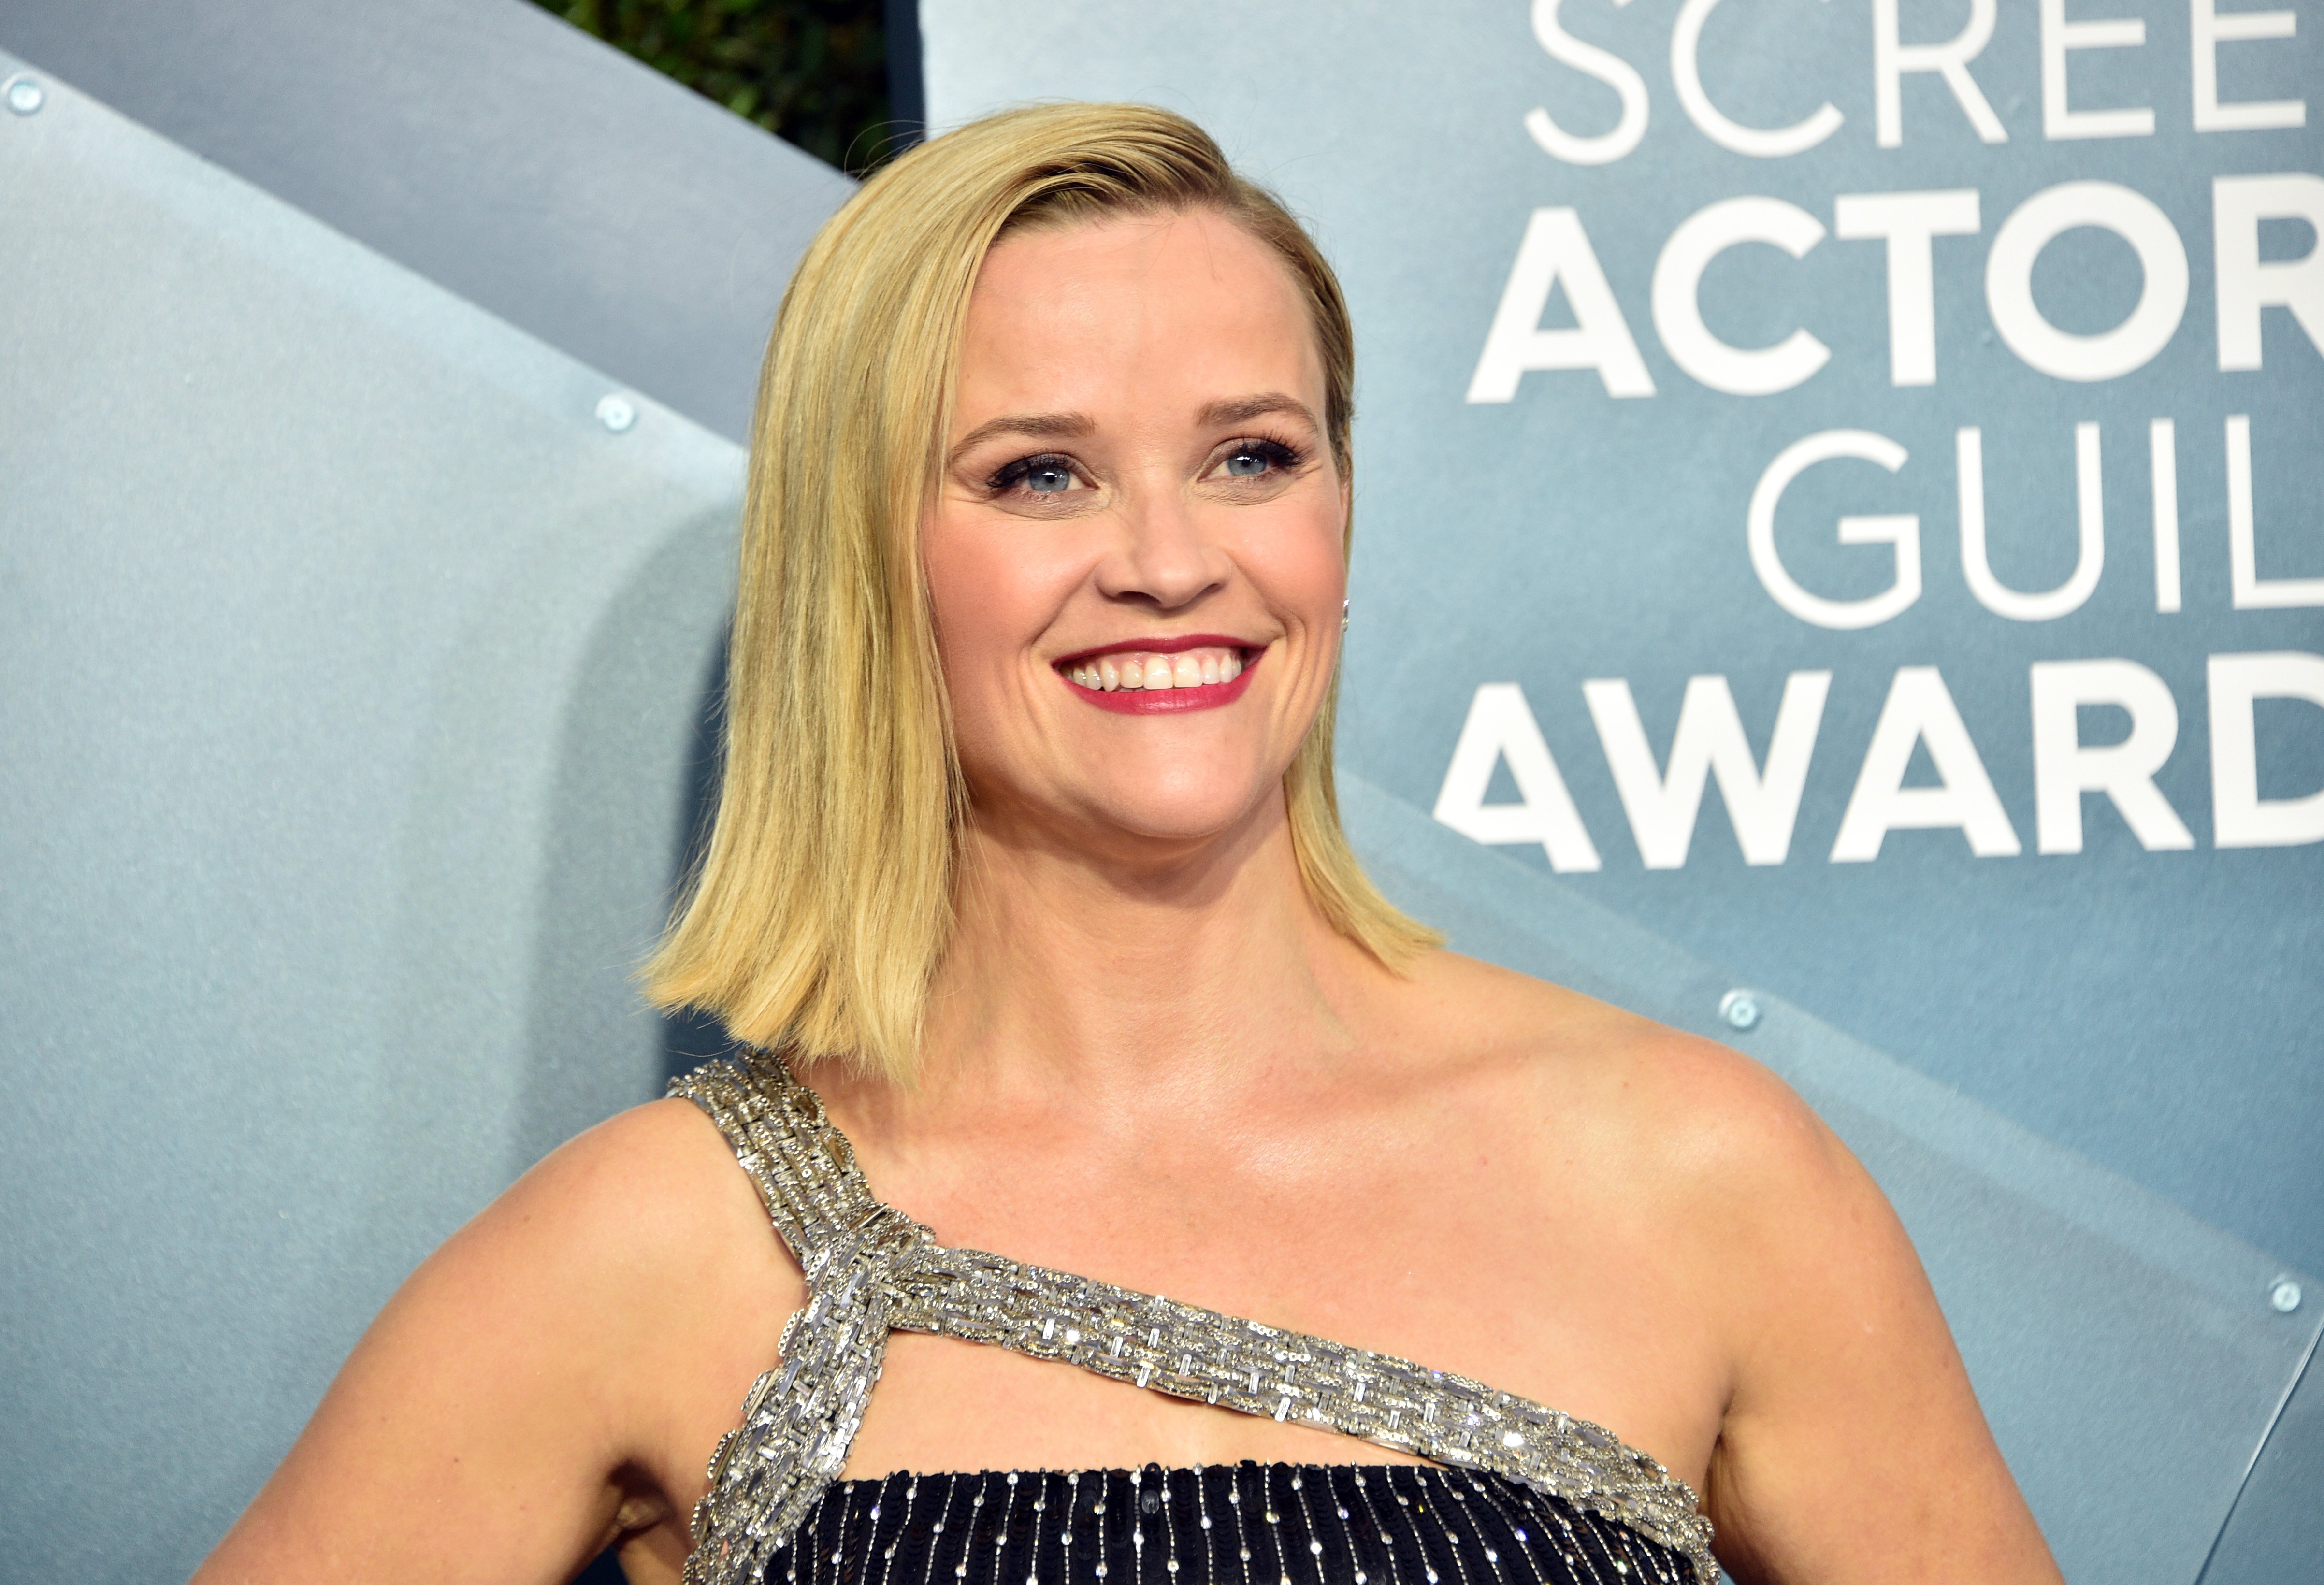 Reese Witherspoon at the SAG awards in January 2020